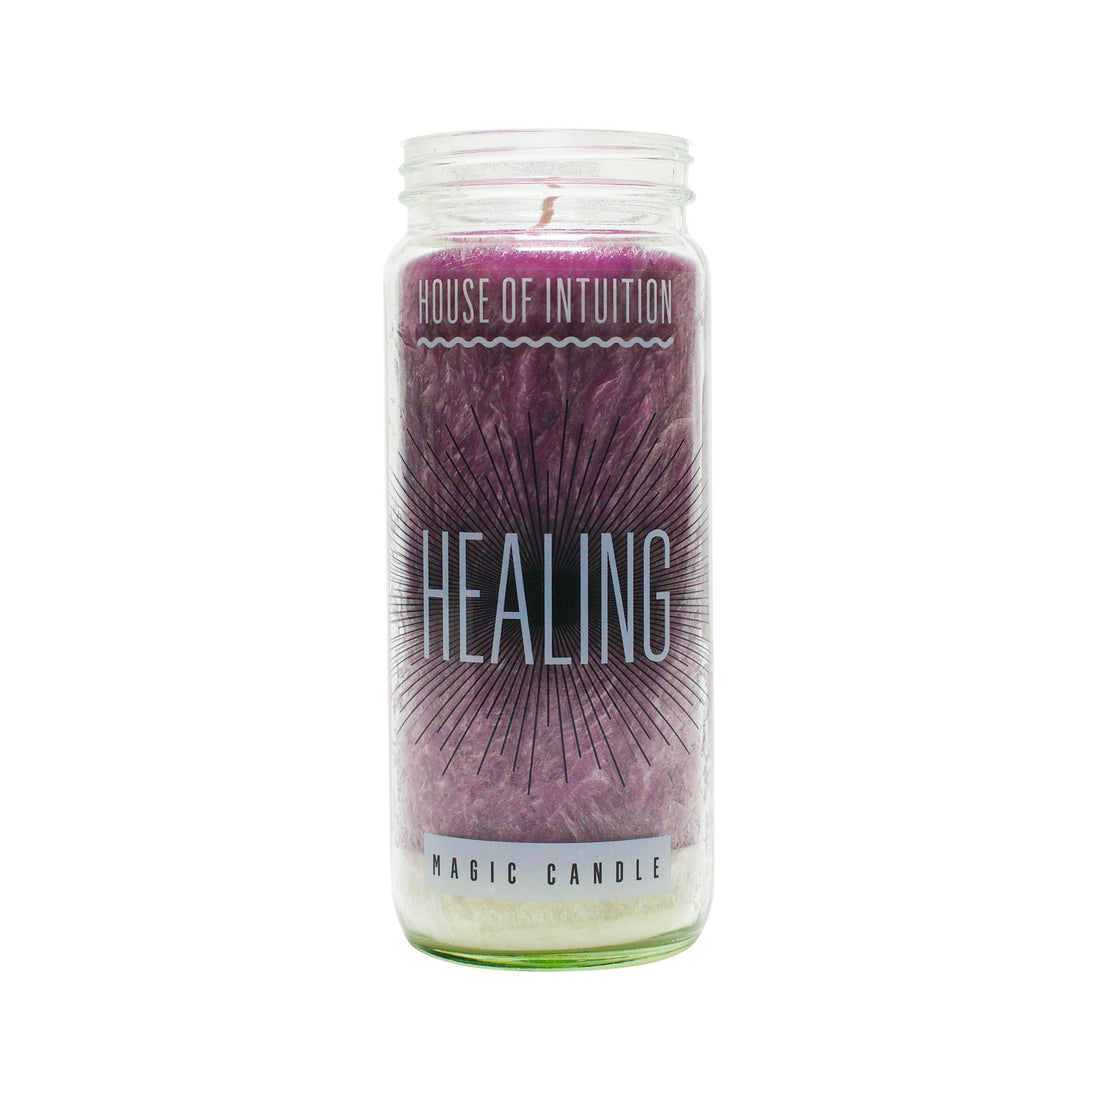 Healing Magic Candle Magic Candles House of Intuition 